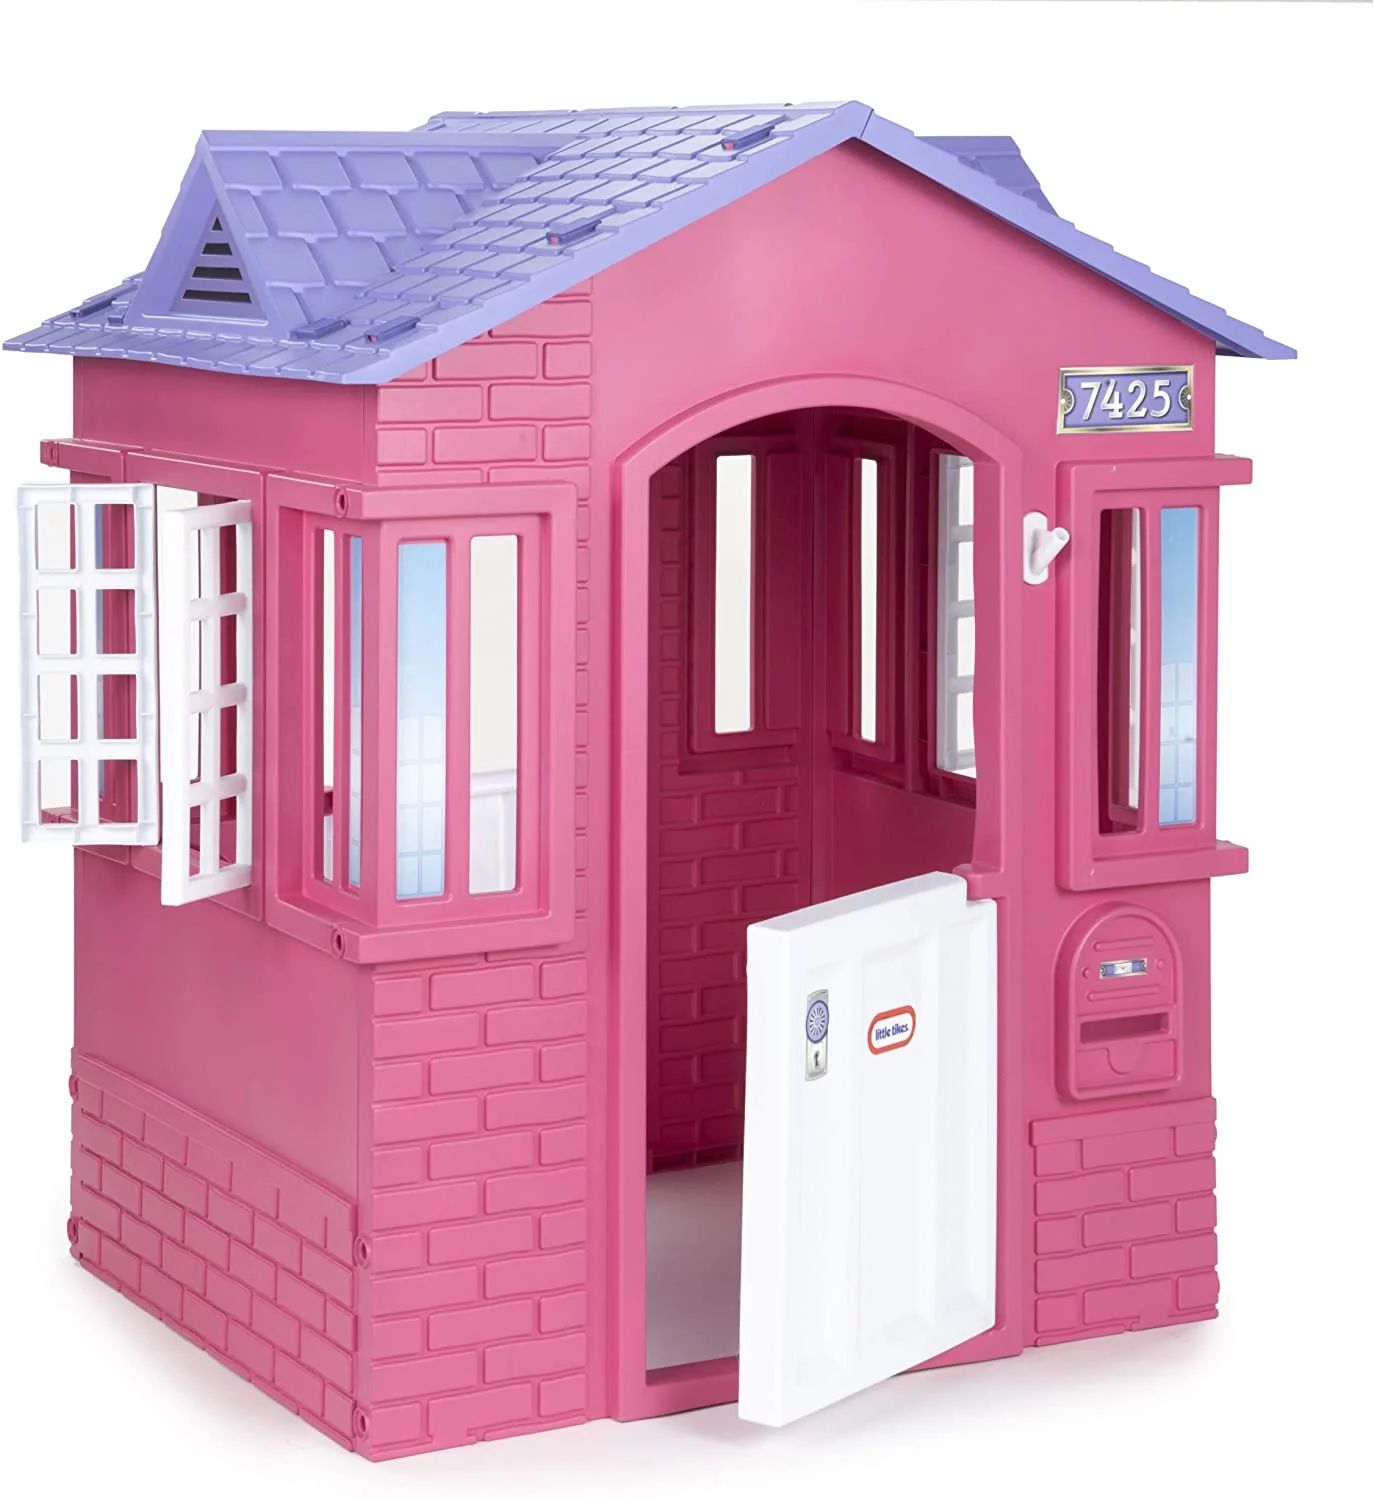 Little Tikes Cape Cottage House, Pink - Pretend Playhouse with Working Doors, Window Shutters, an... | Walmart (US)